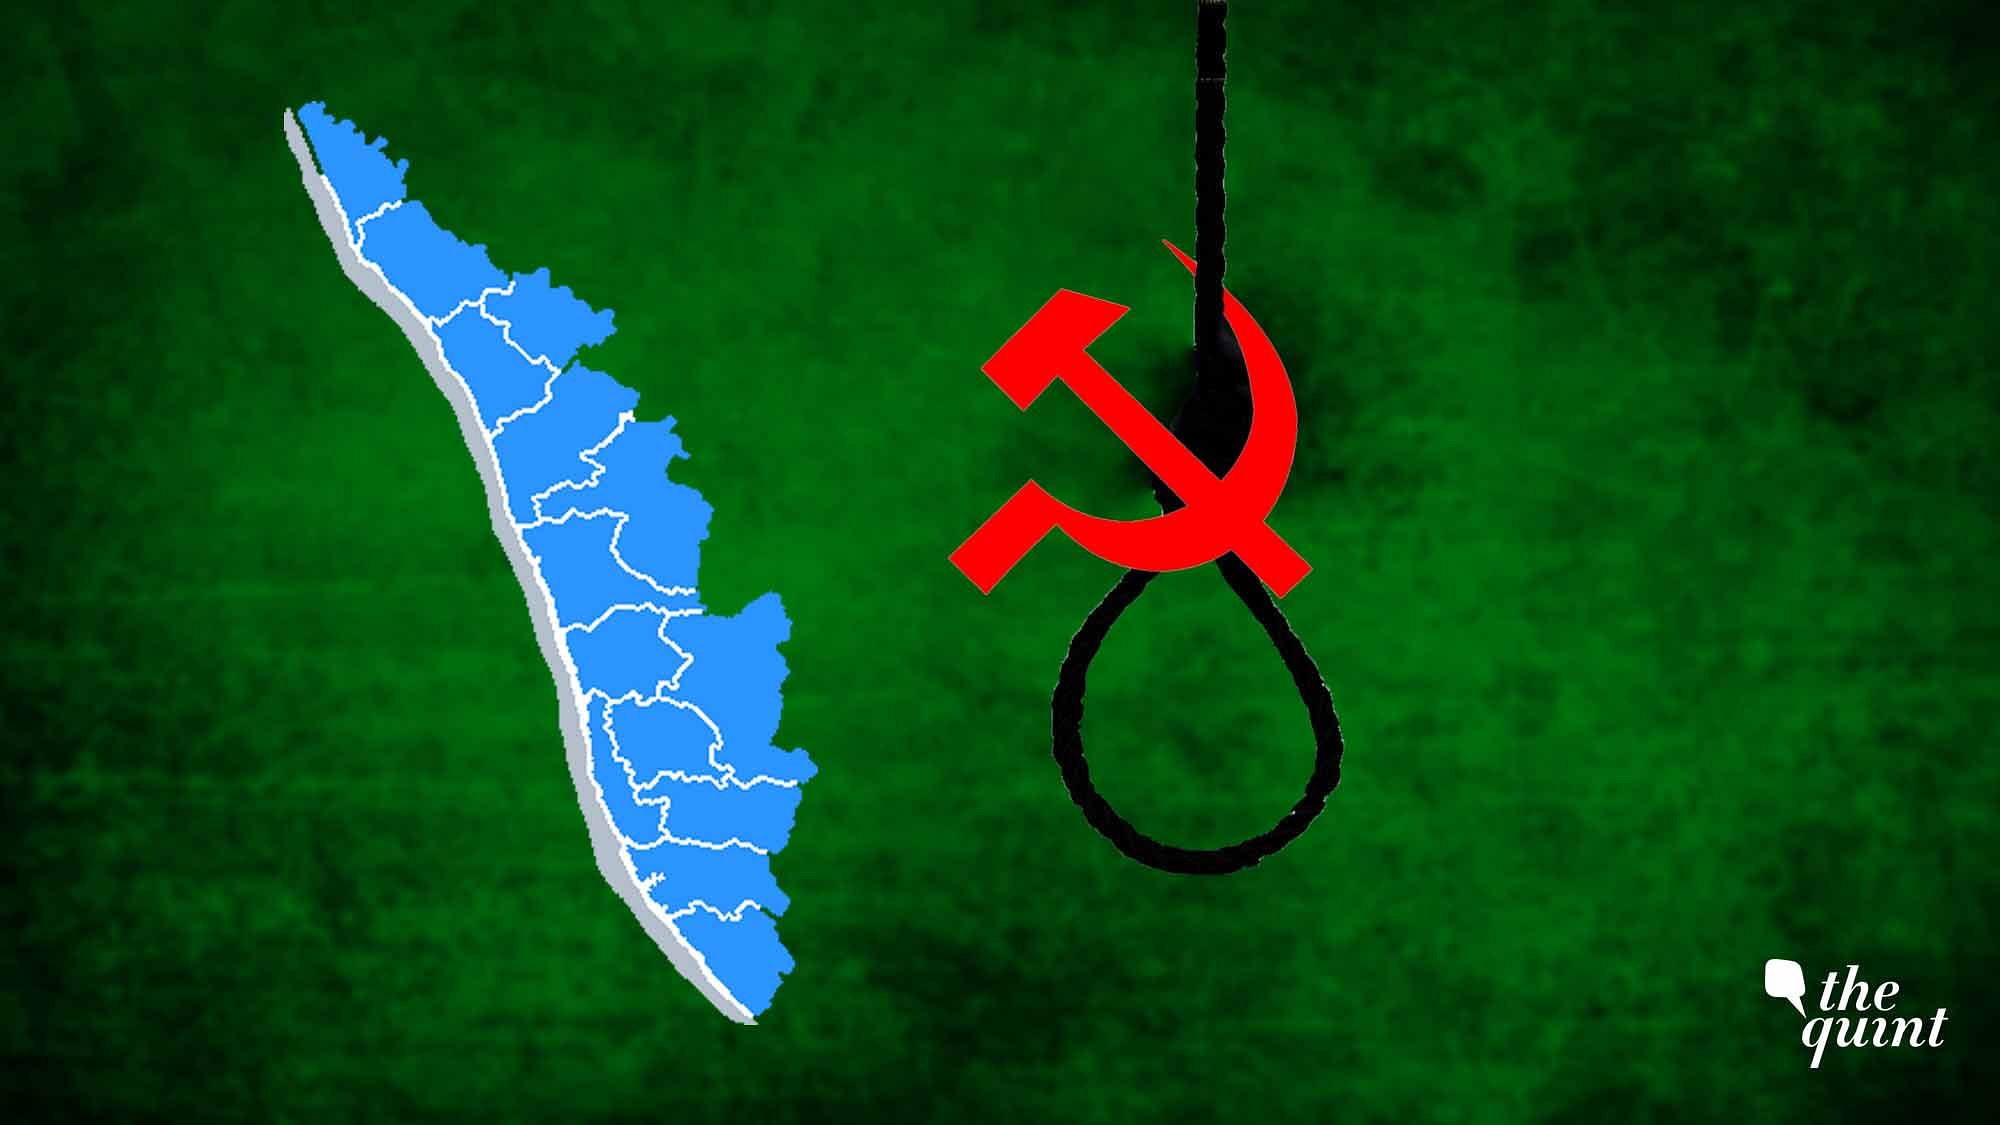 Illustration showing Kerala map and CPI(M) symbol on a noose, used for representational purposes.